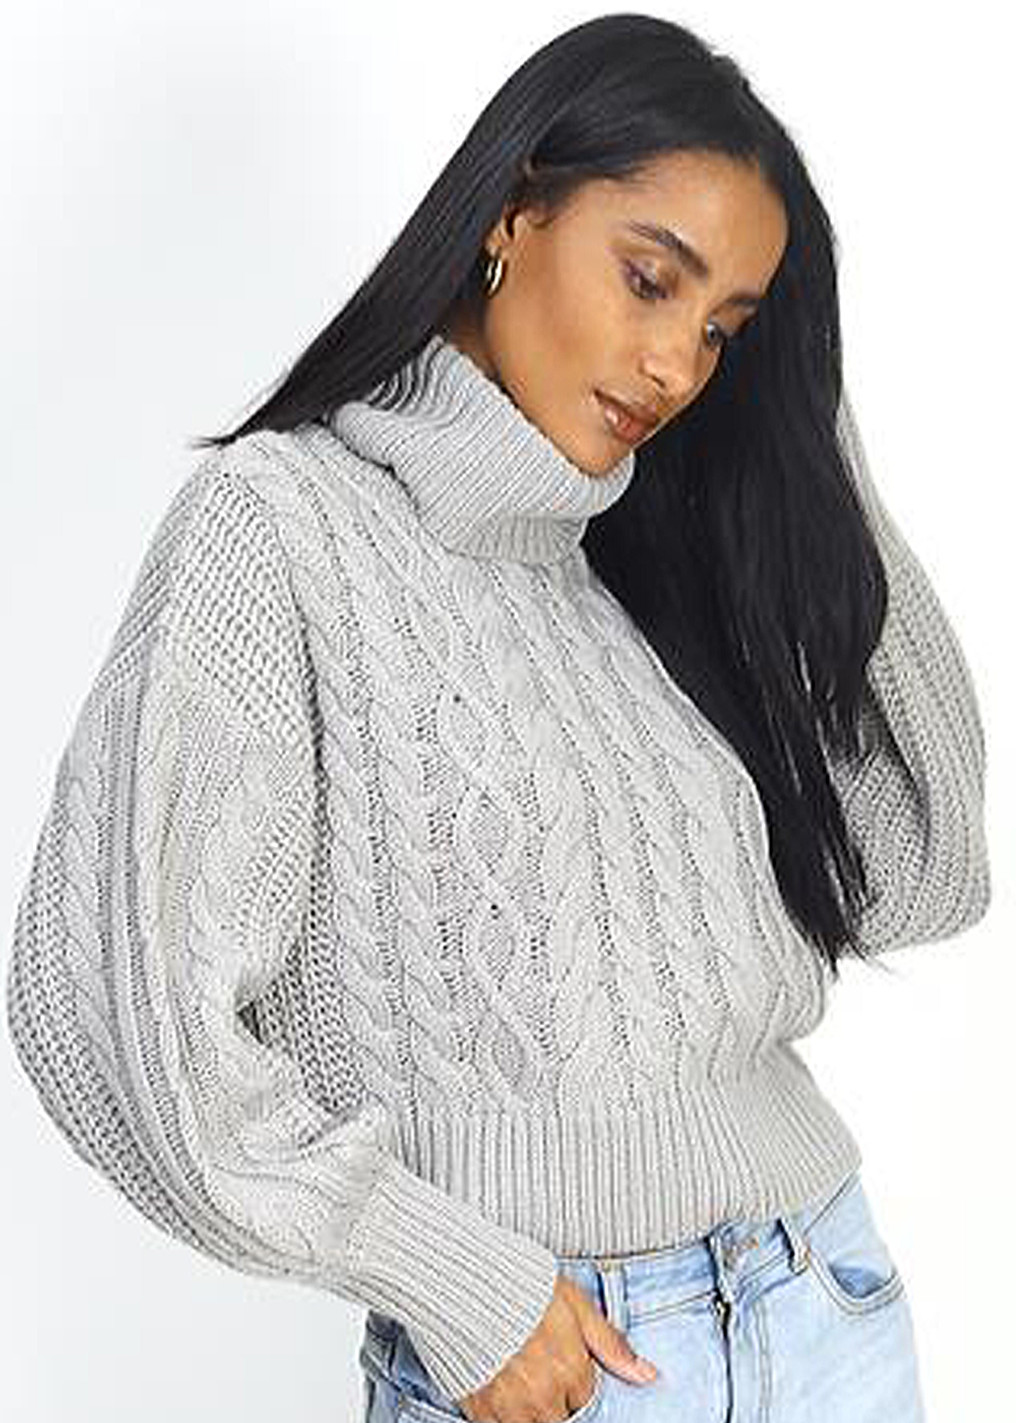 Polo Neck Jumpers: Yay or Nay?